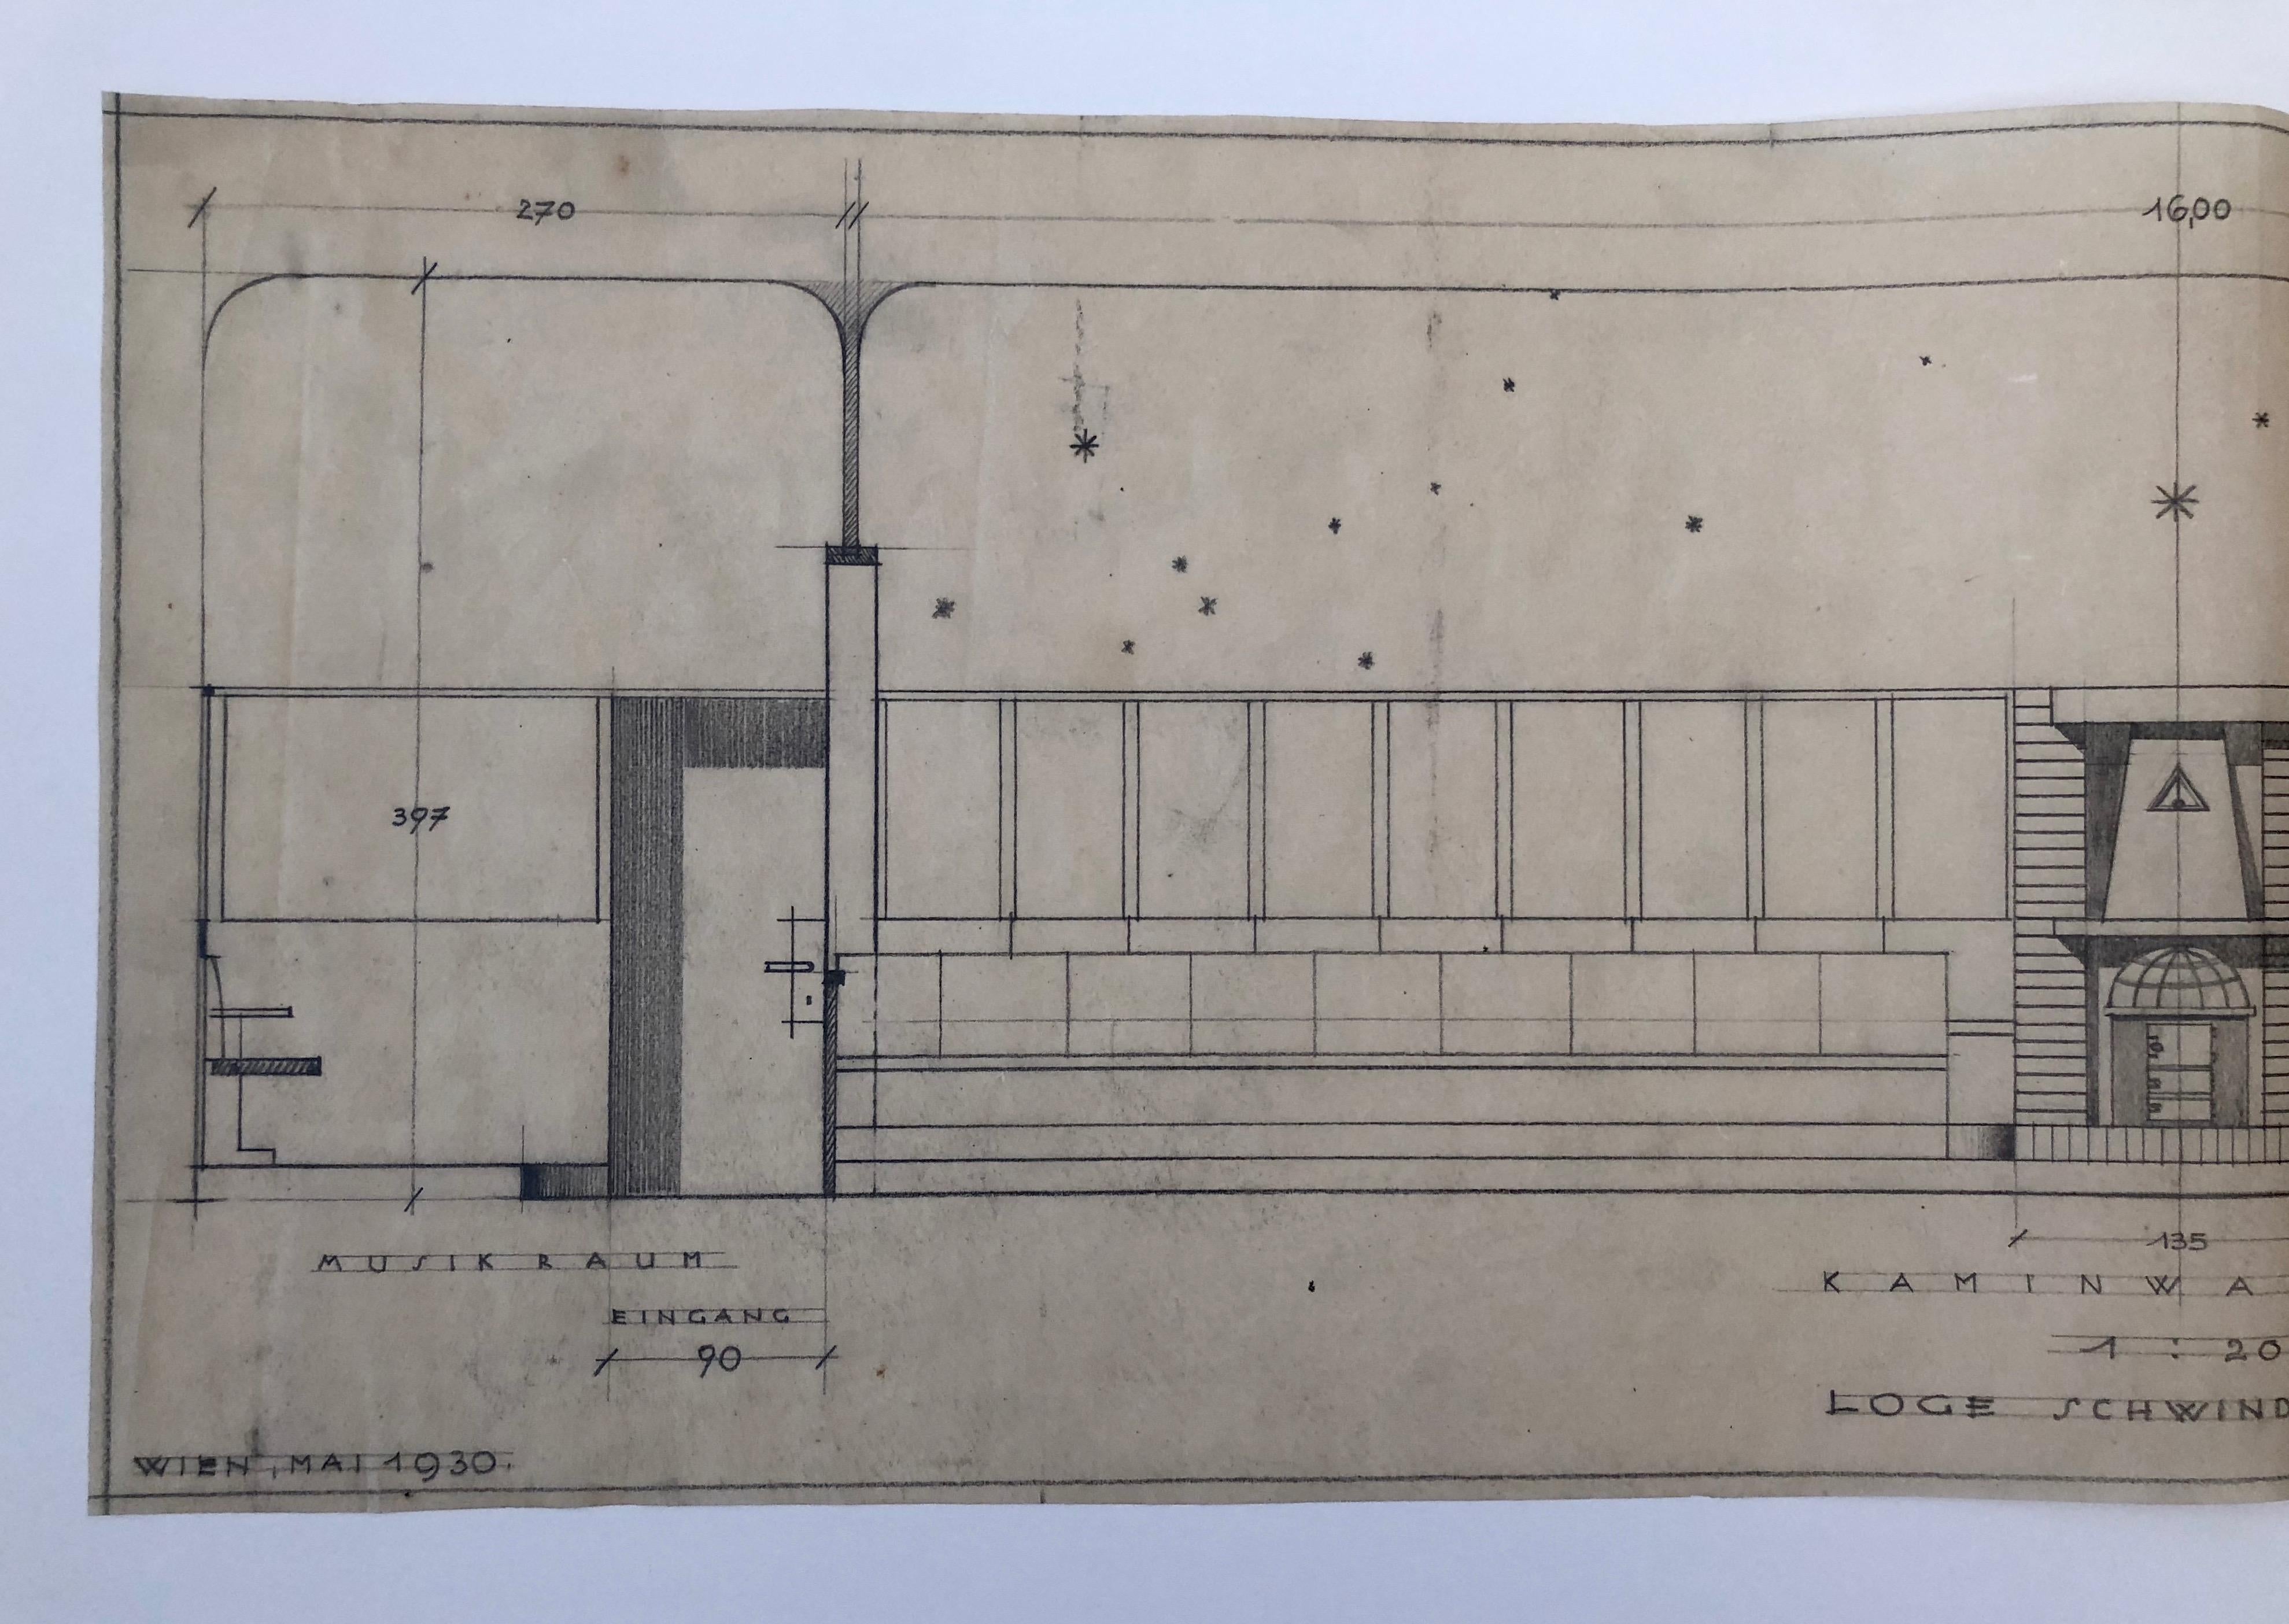 Set of Working Drawings, 1930, for a Free Masons Lodge, Schwind Gasse, Vienna For Sale 8